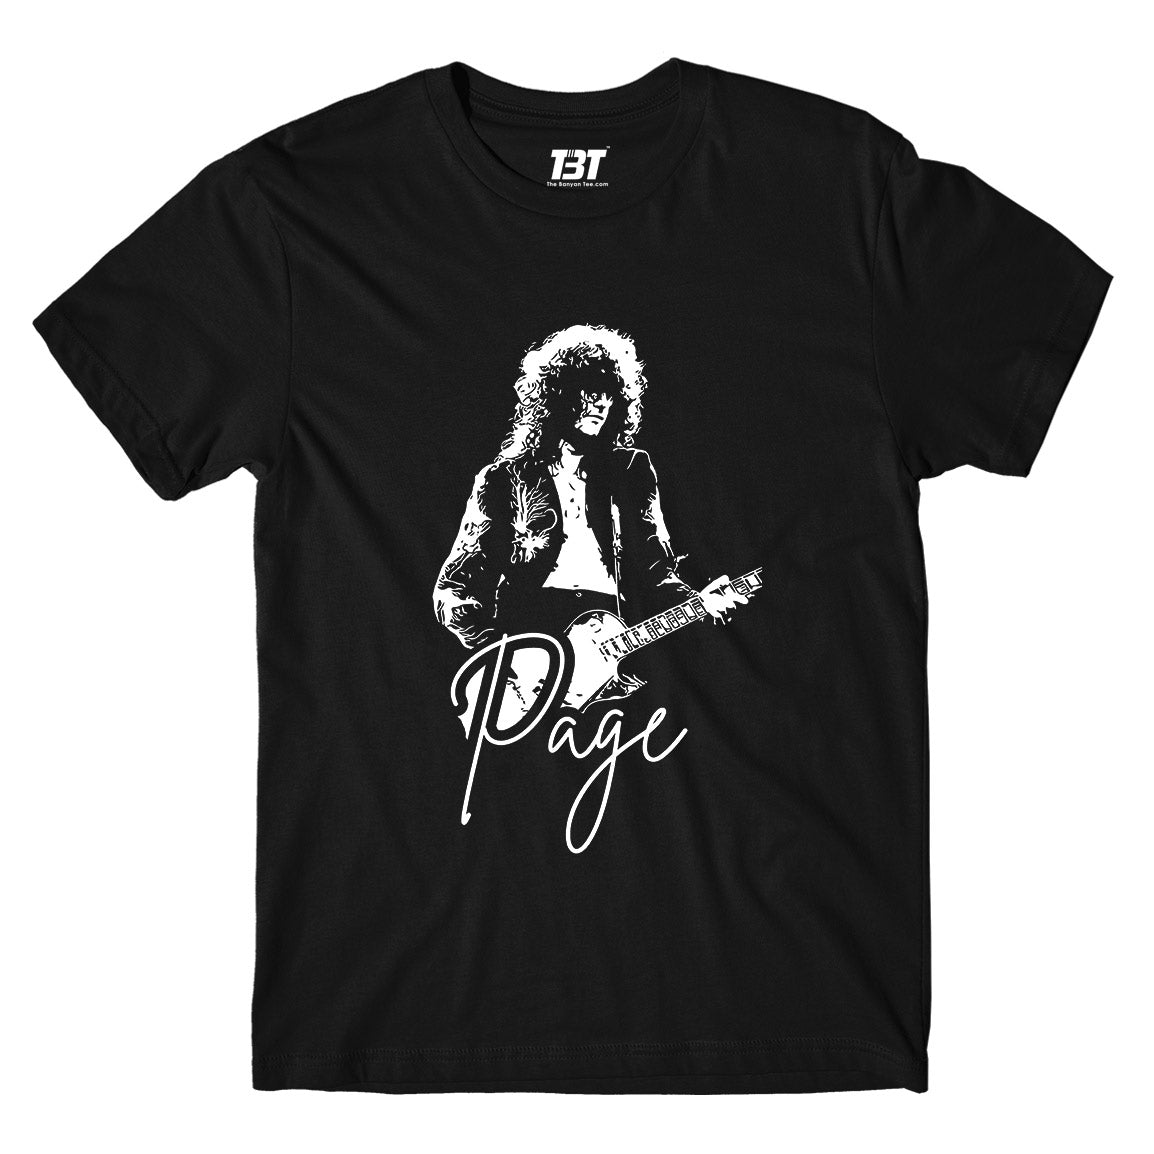 Led Zeppelin T-shirt - Jimmy Page T-shirt The Banyan Tee TBT